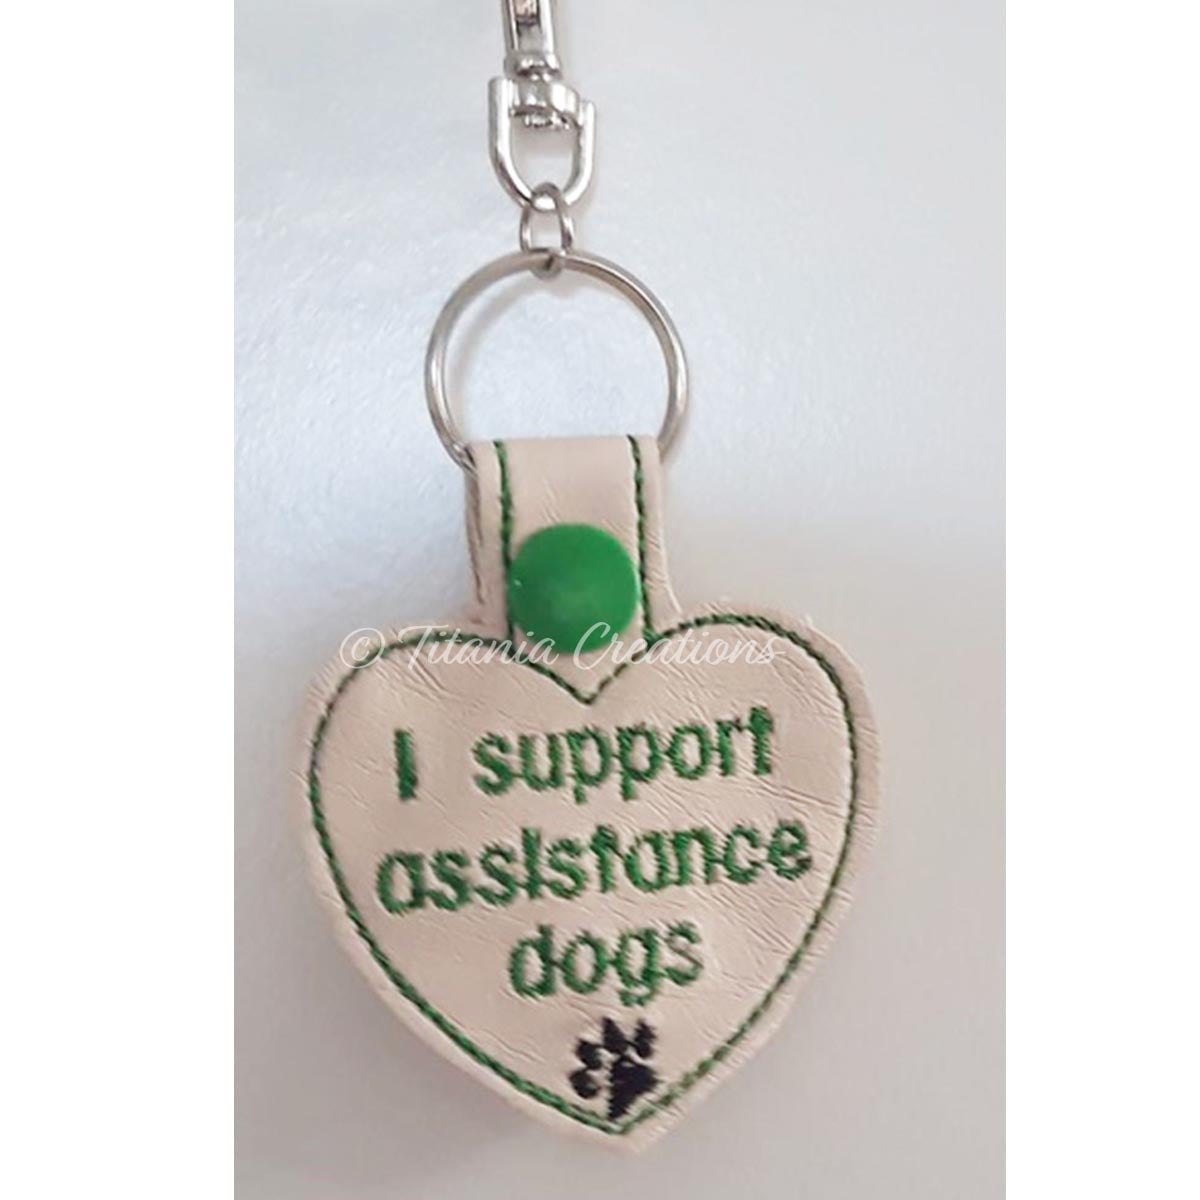 I Support Assistance Dogs Key Fob 4x4 STRICTLY FOR PERSONAL USE ONLY